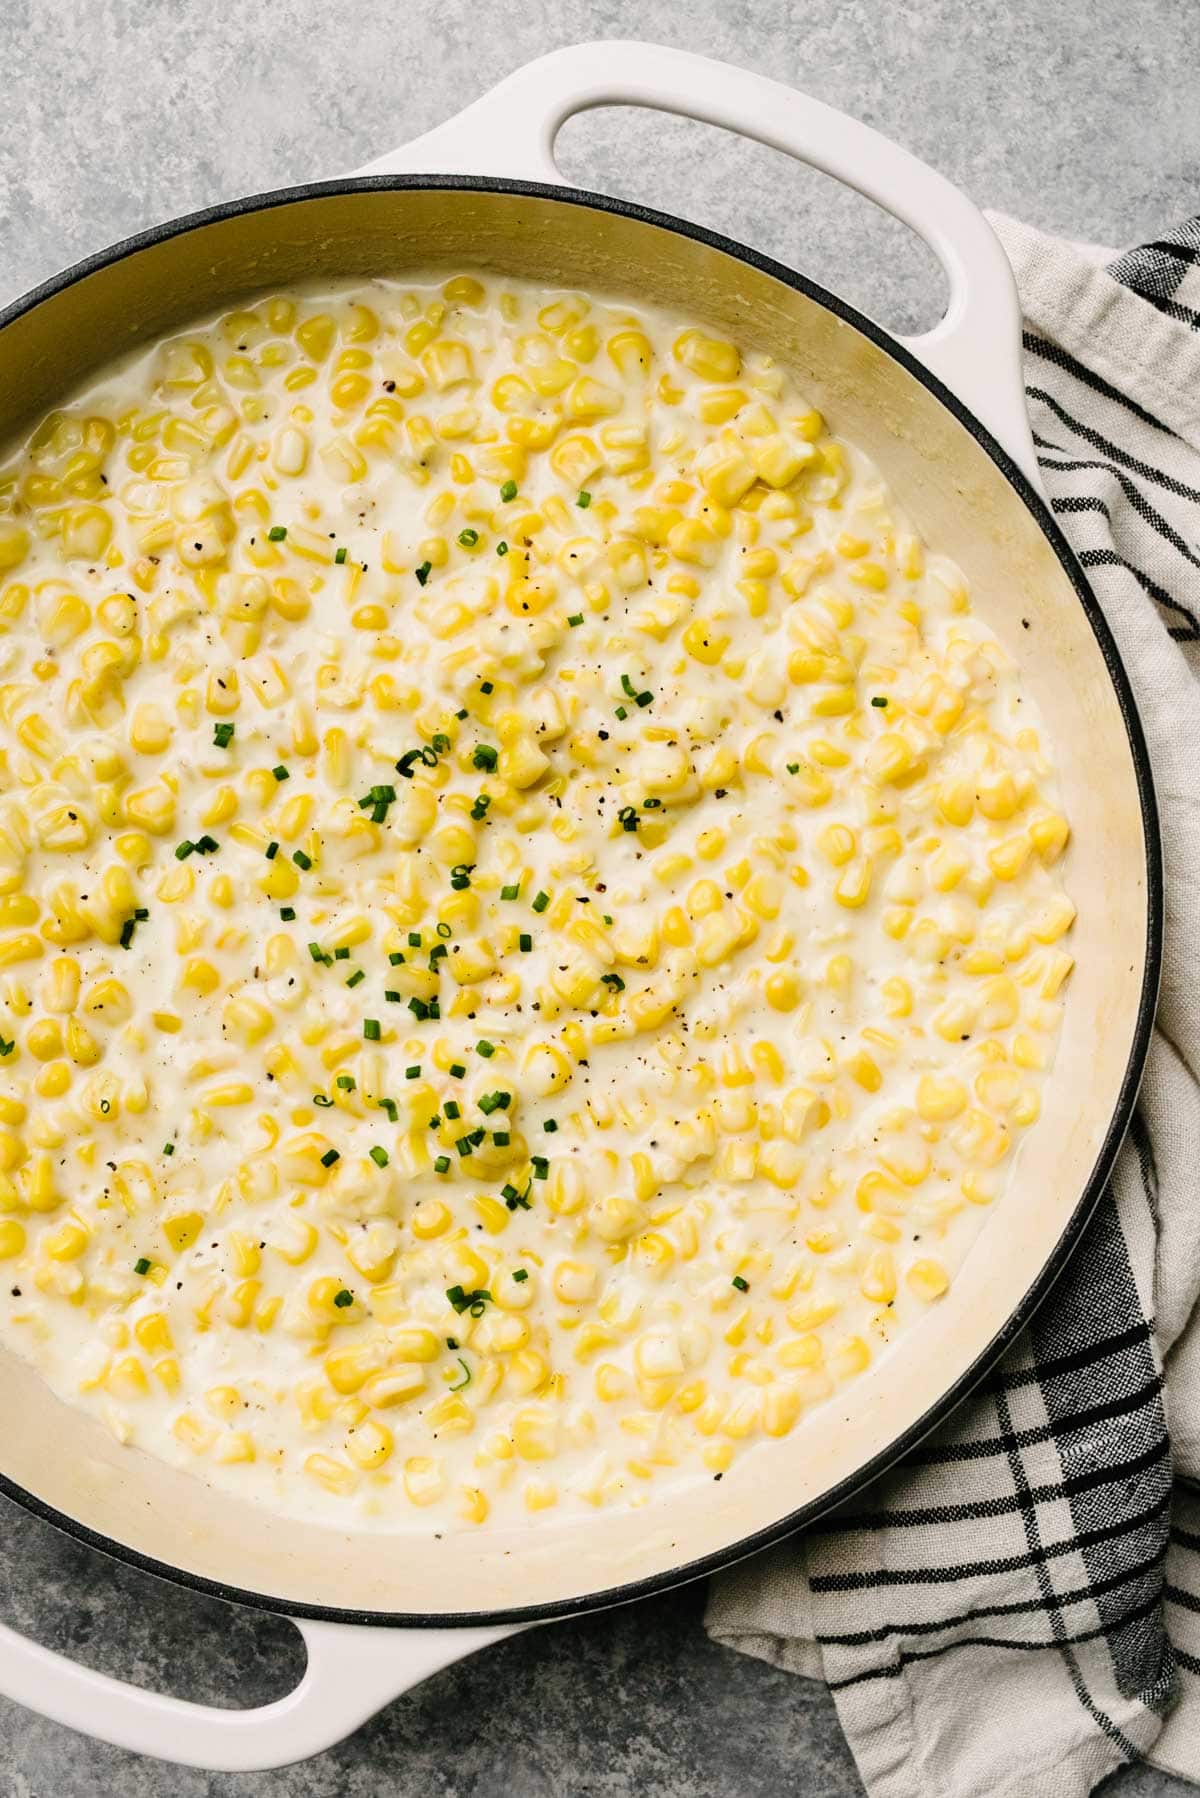 Homemade creamed corn in a large grey enameled skillet, garnished with fresh chives; a striped tan and black linen napkin is tucked to the side.